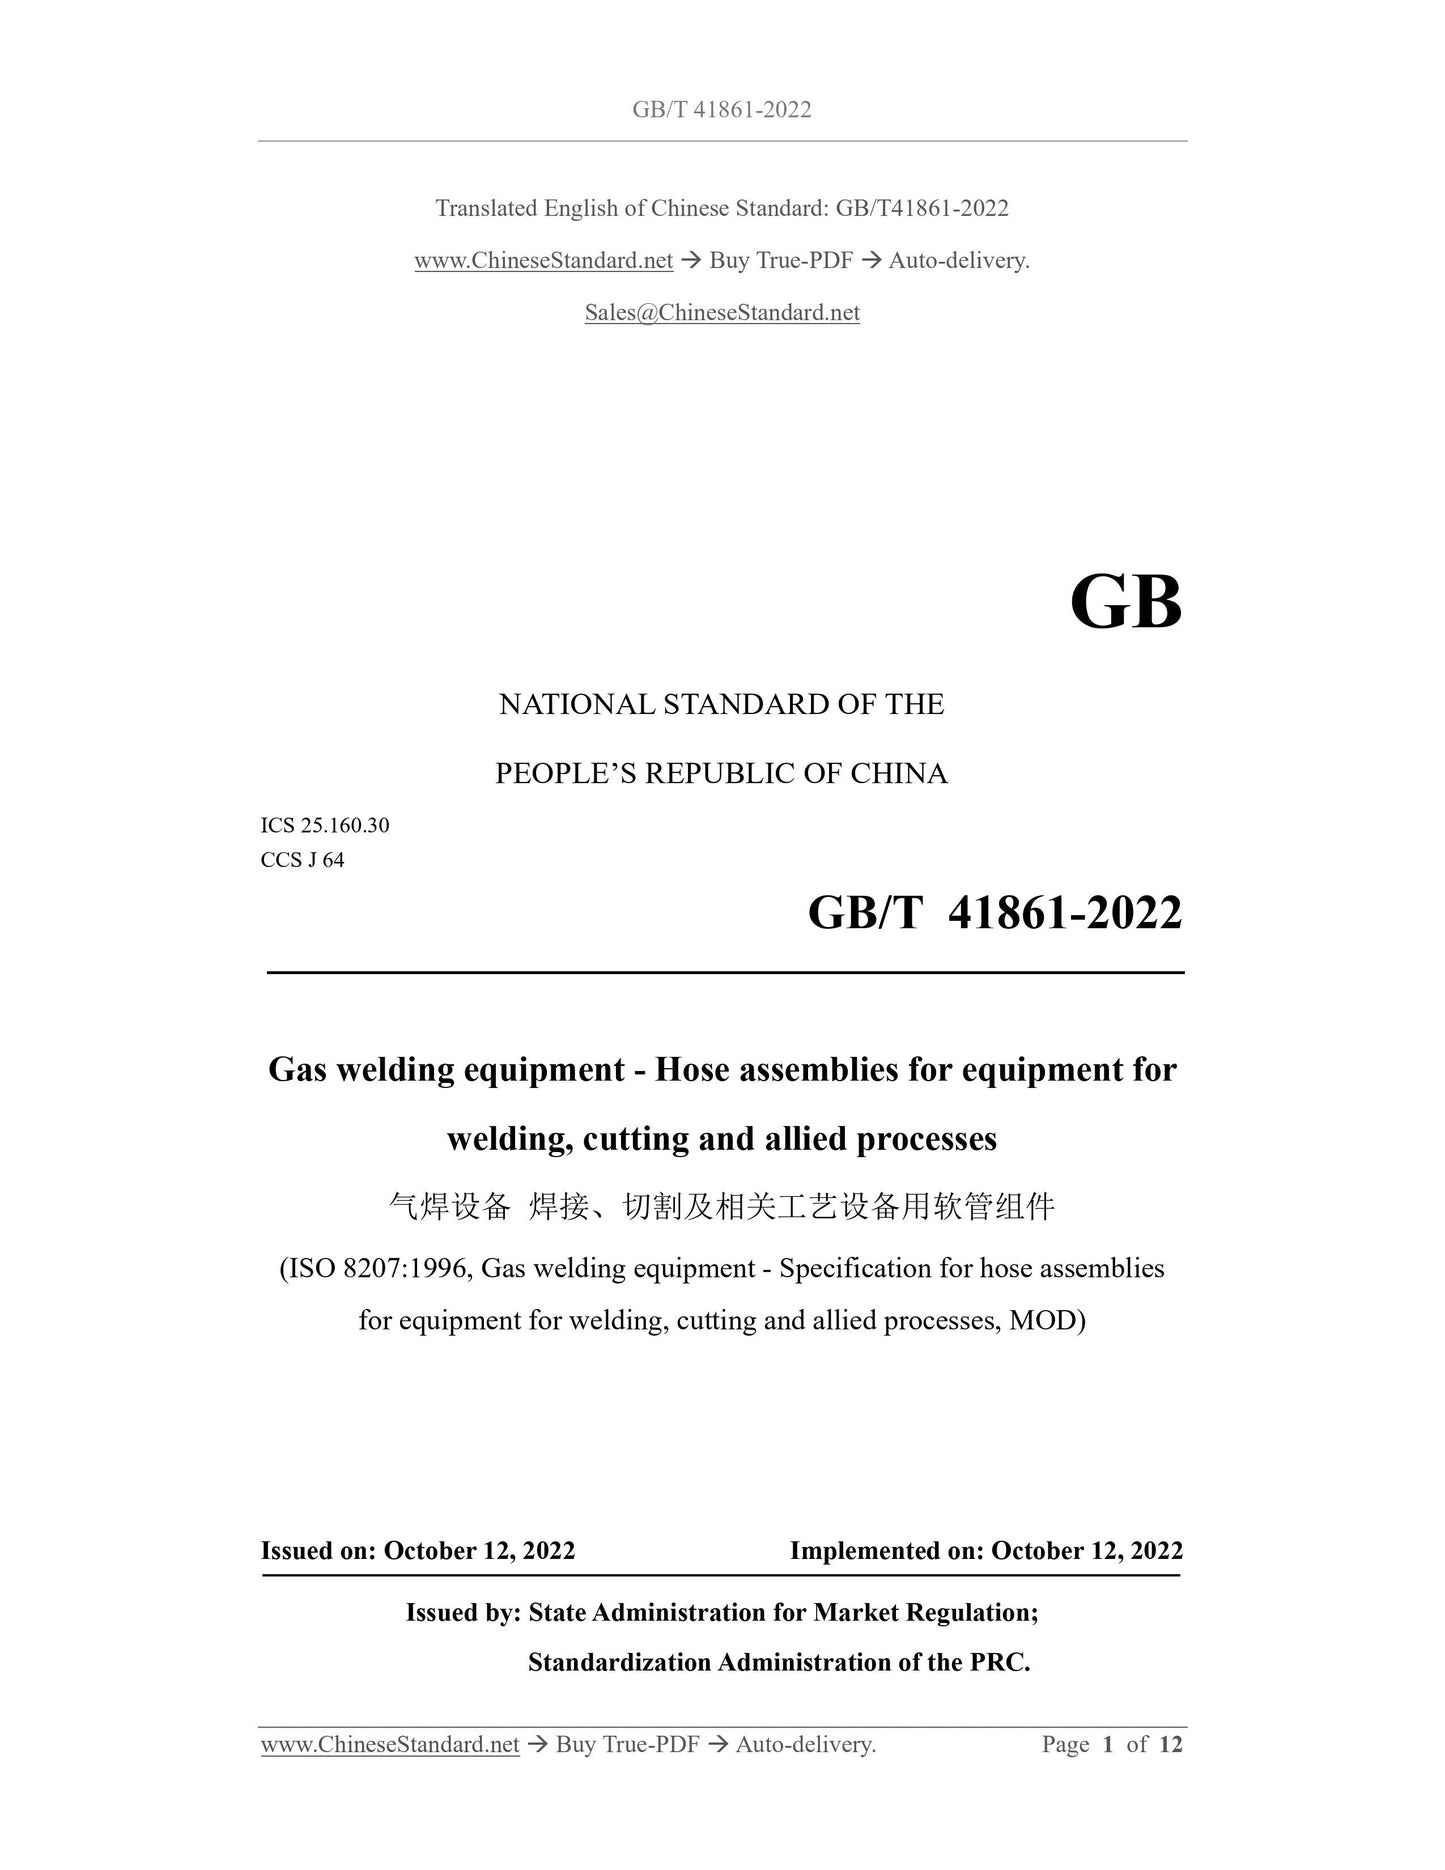 GB/T 41861-2022 Page 1